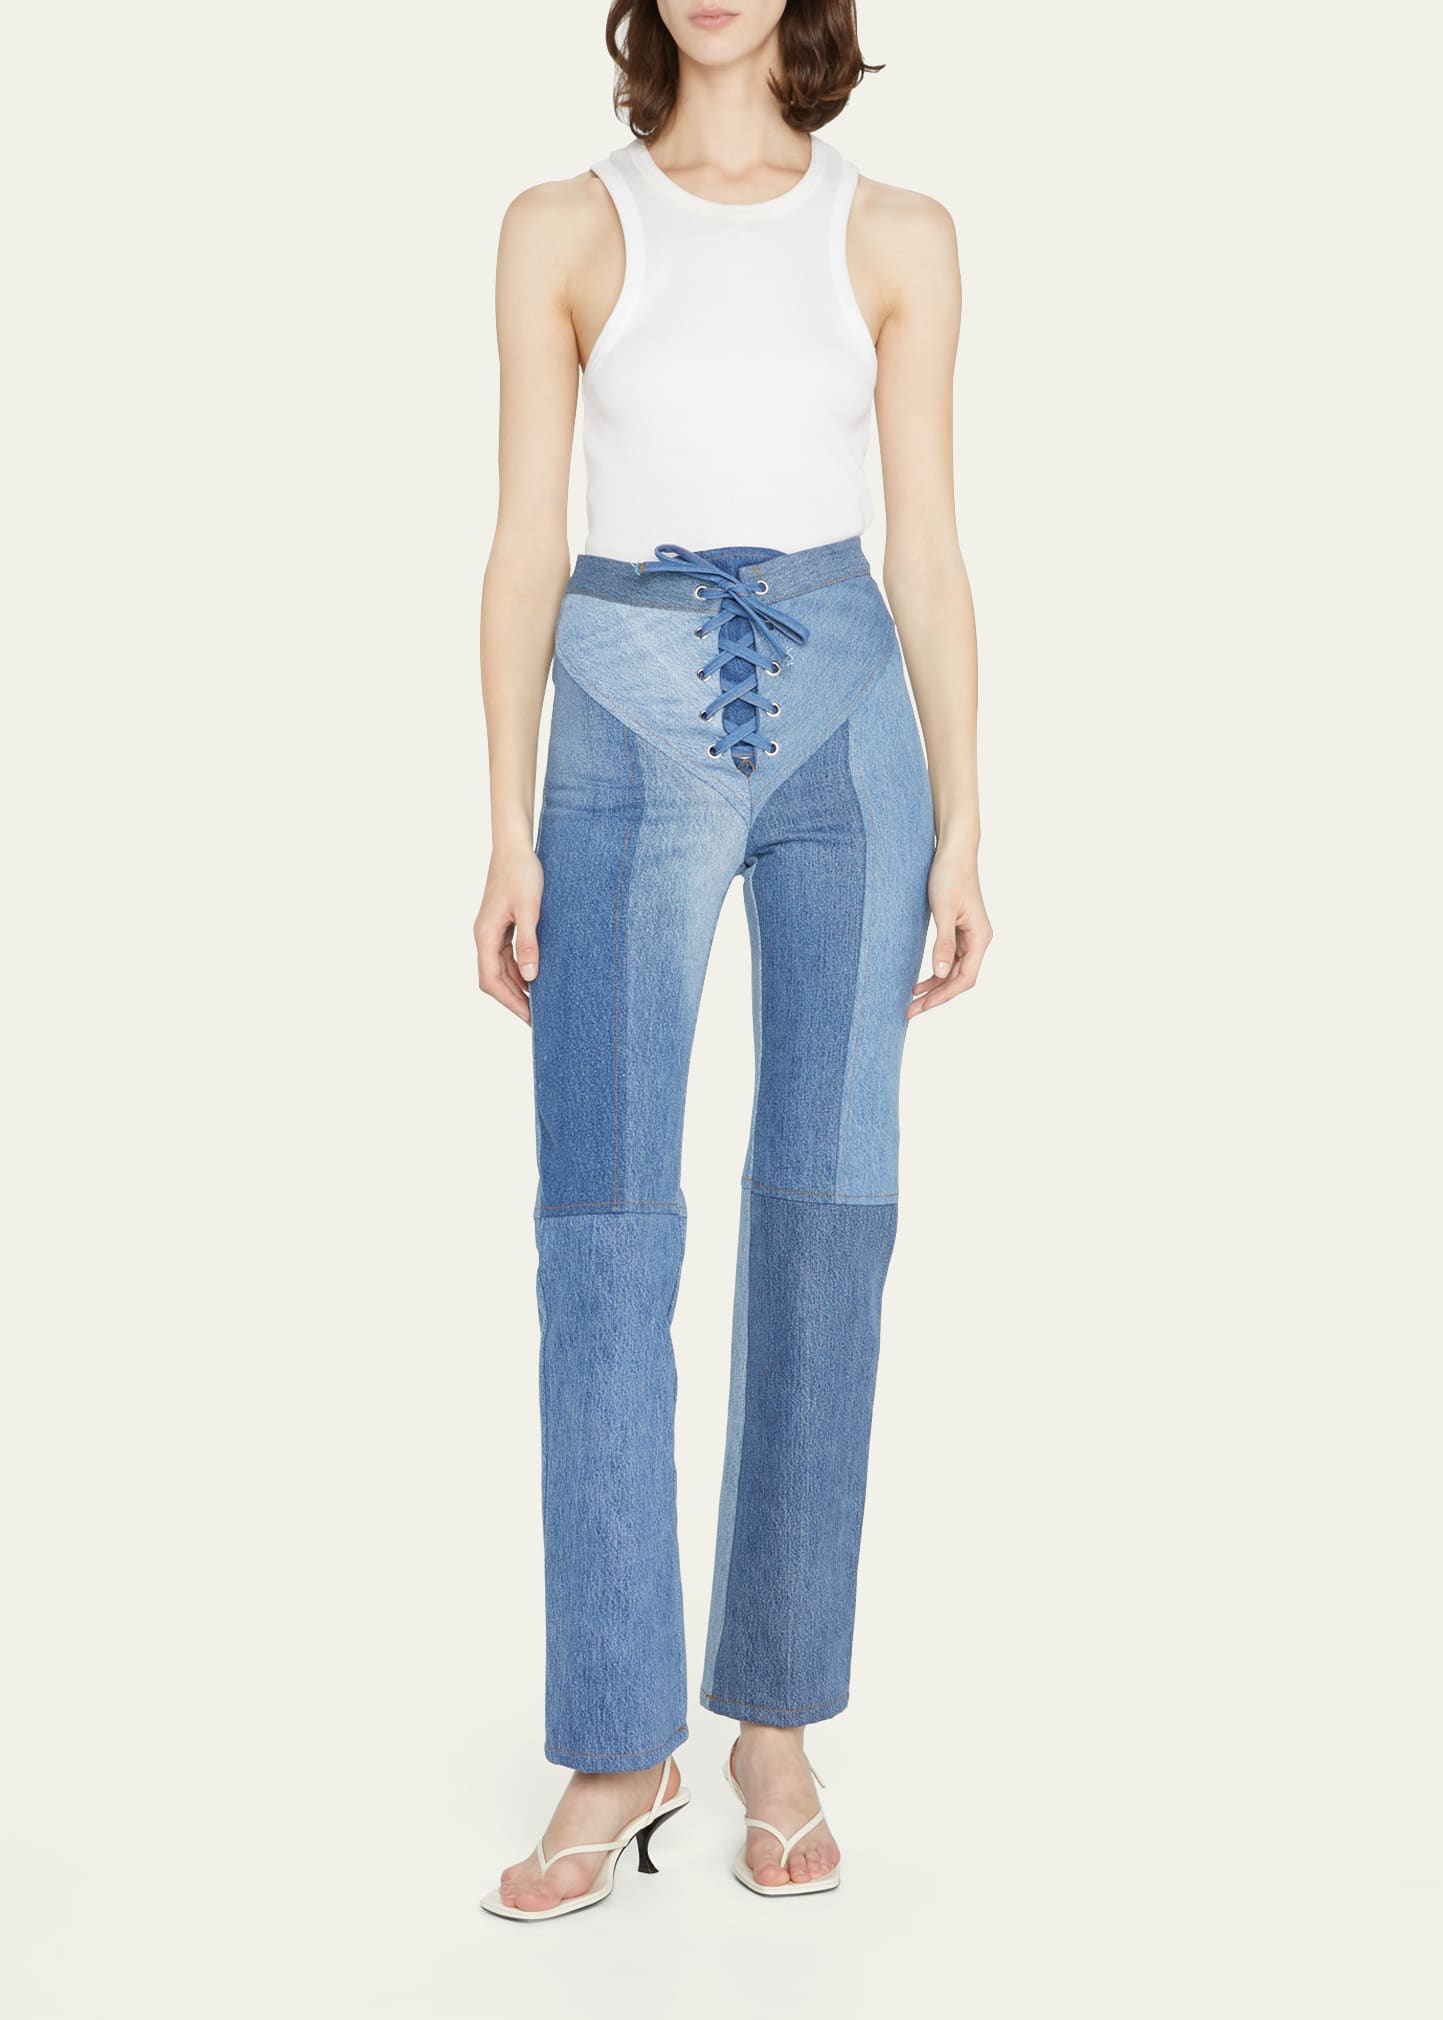 EB DENIM Lace-Up Straight Leg Colorblock Cropped Jeans